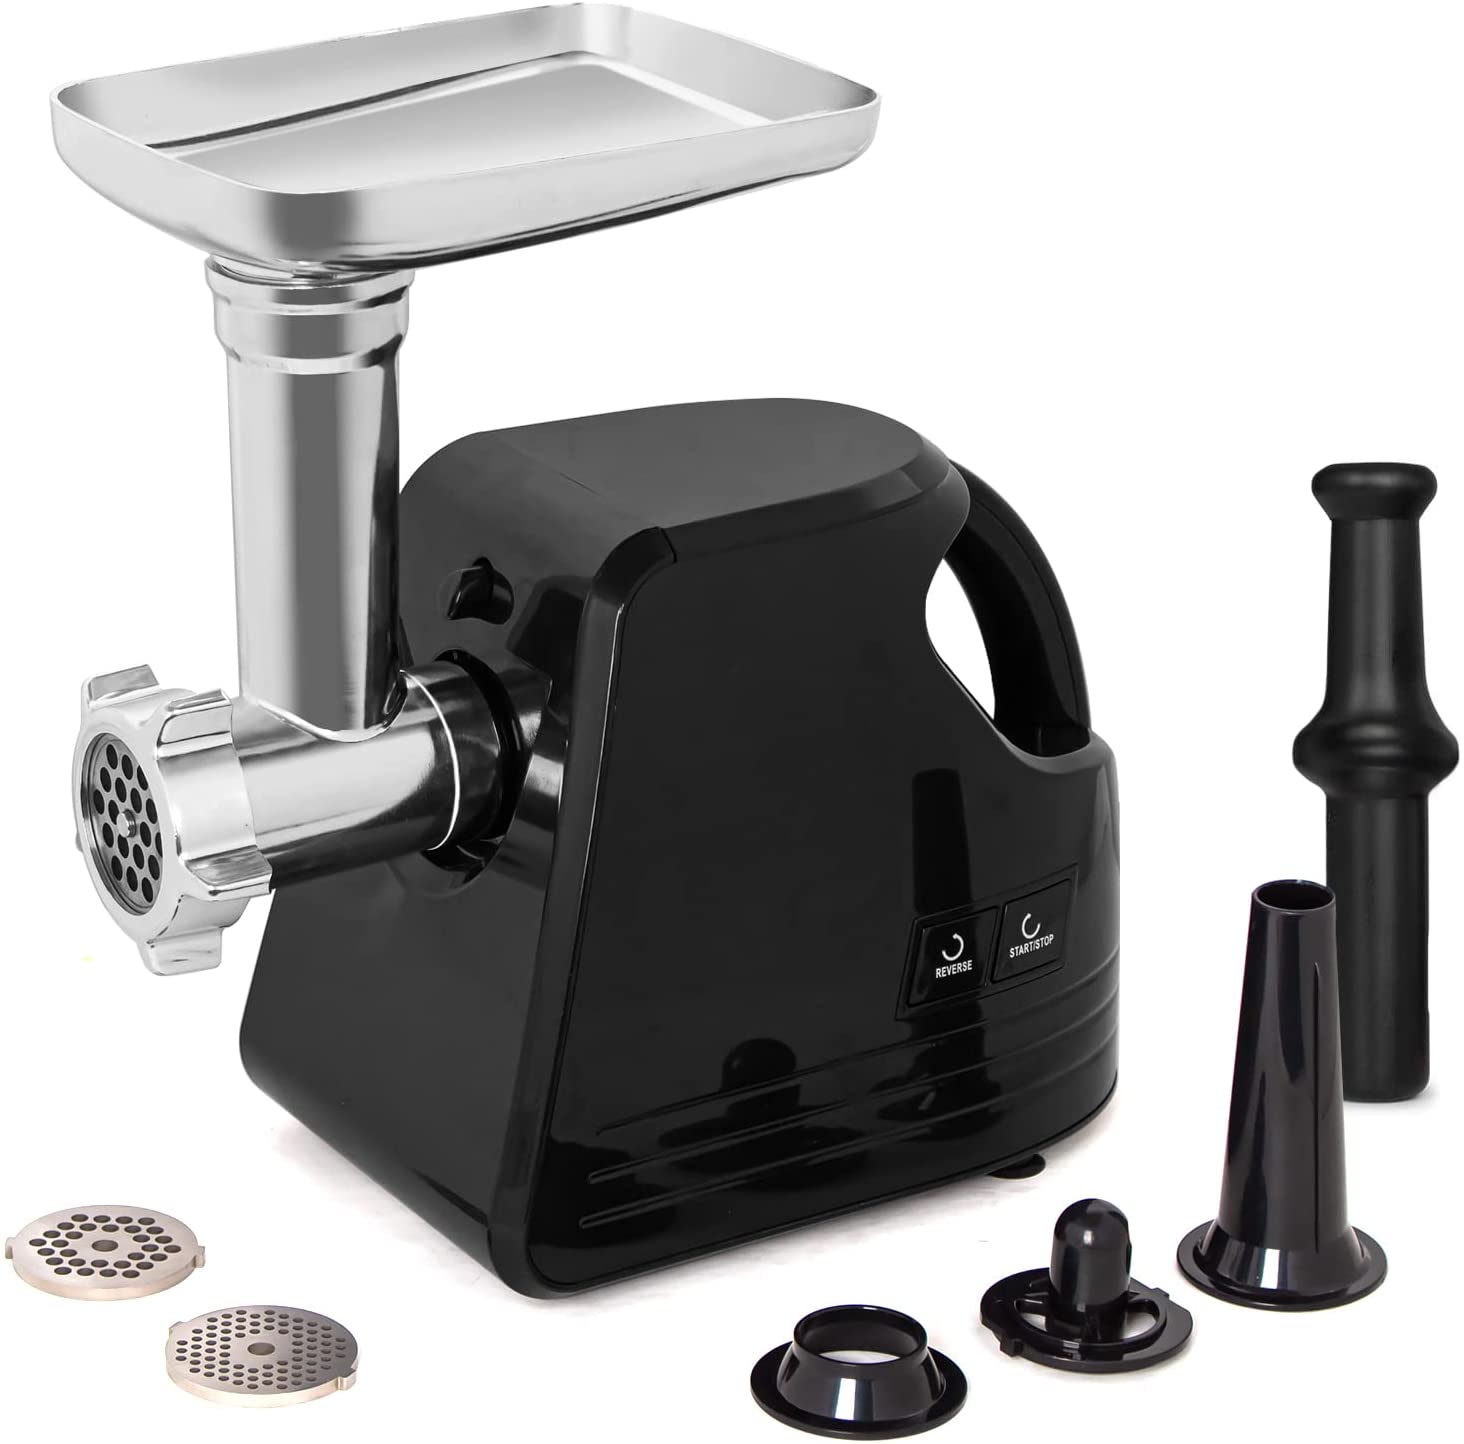 Domaier Leogreen – Mincer, Meat Food Chopper, Black, with Cutting Plates, Maximum Capacity: 1600 W Voltage: 220/240 V